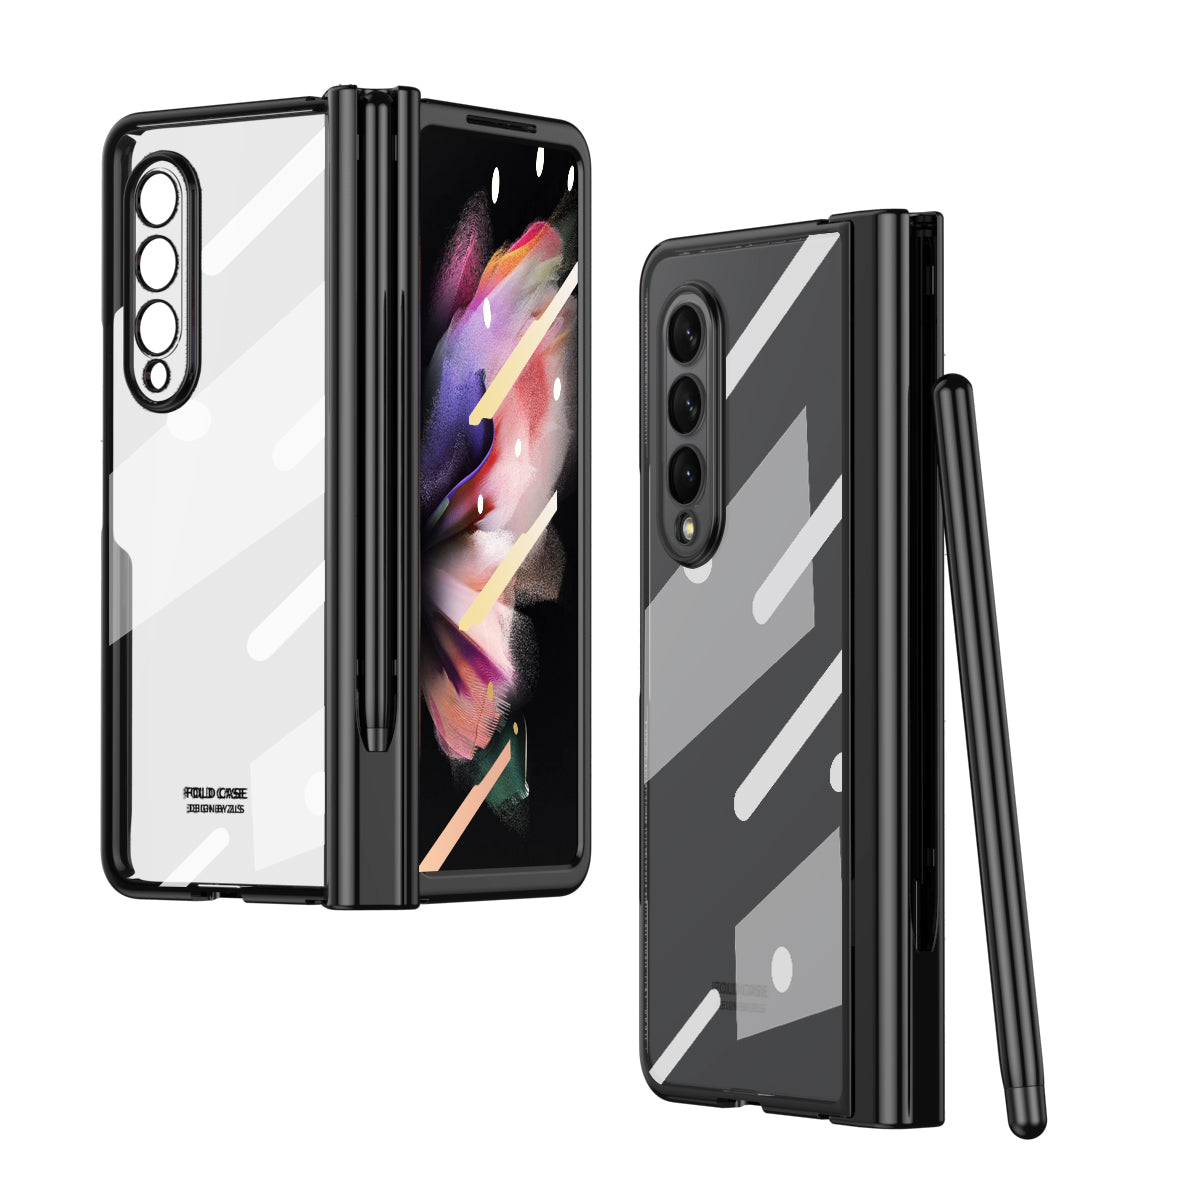 S Pen Fold Edition Case for Samsung Galaxy Z Fold 2 Z Fold 3 Pencil Slot Electroplating Clear Back Cover with Tempered Glass